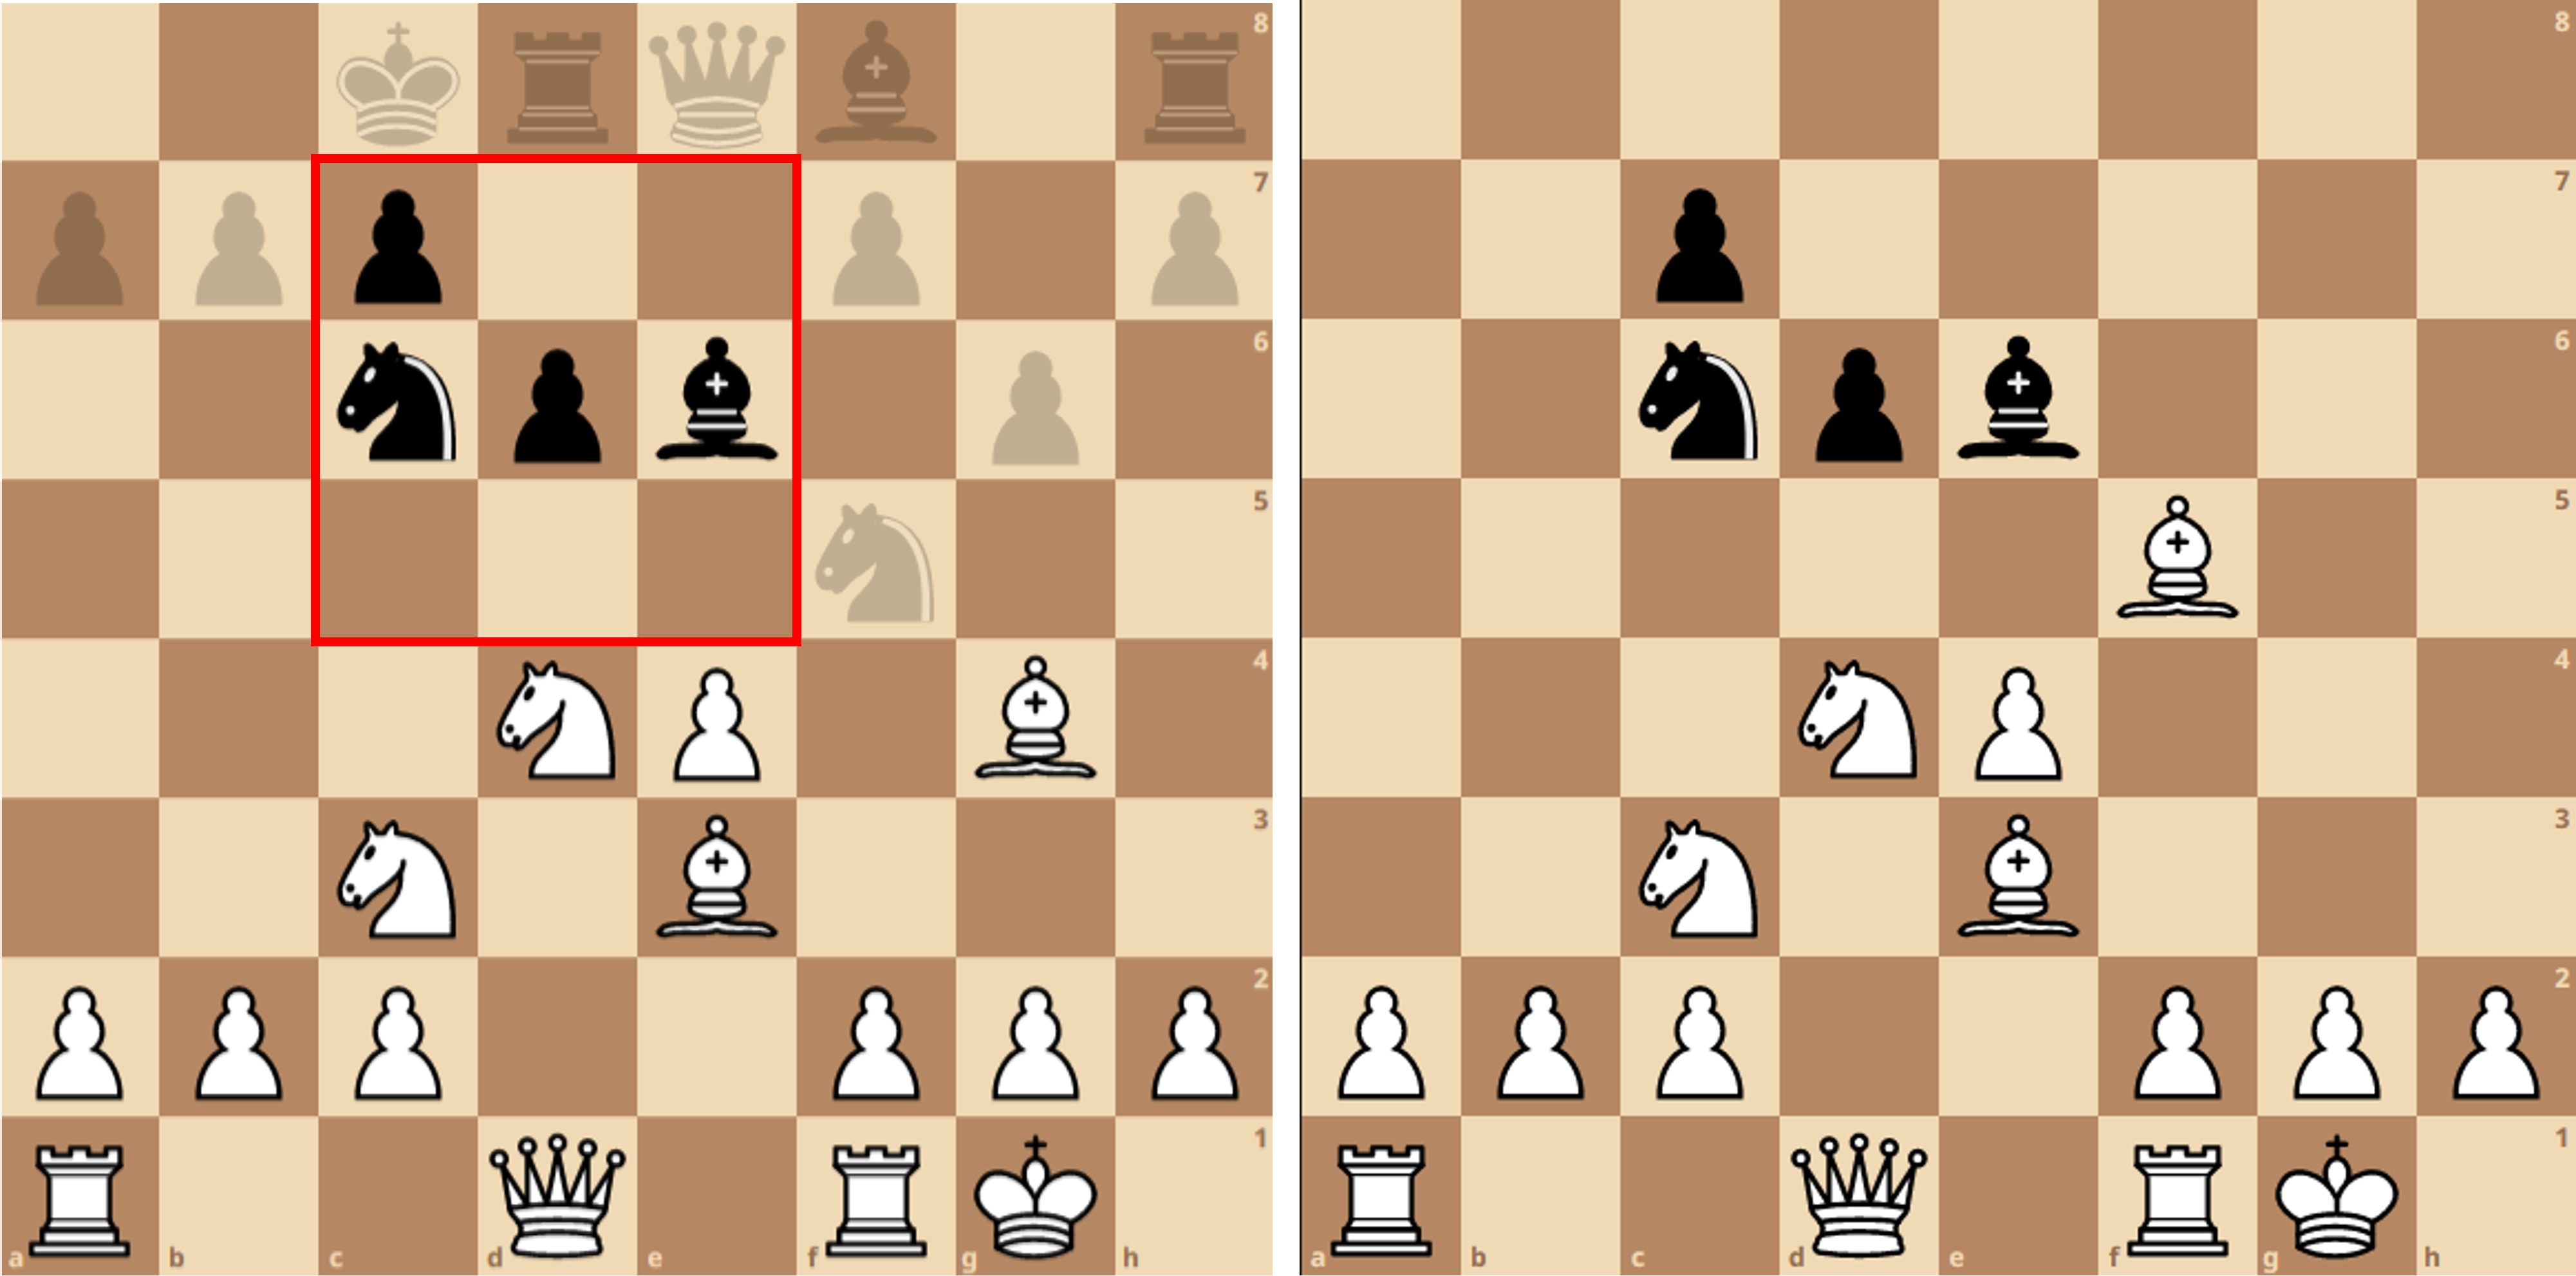 White requests Be6, but Bf5 is taken.  This discrepancy tells White a black piece must have been on f5.